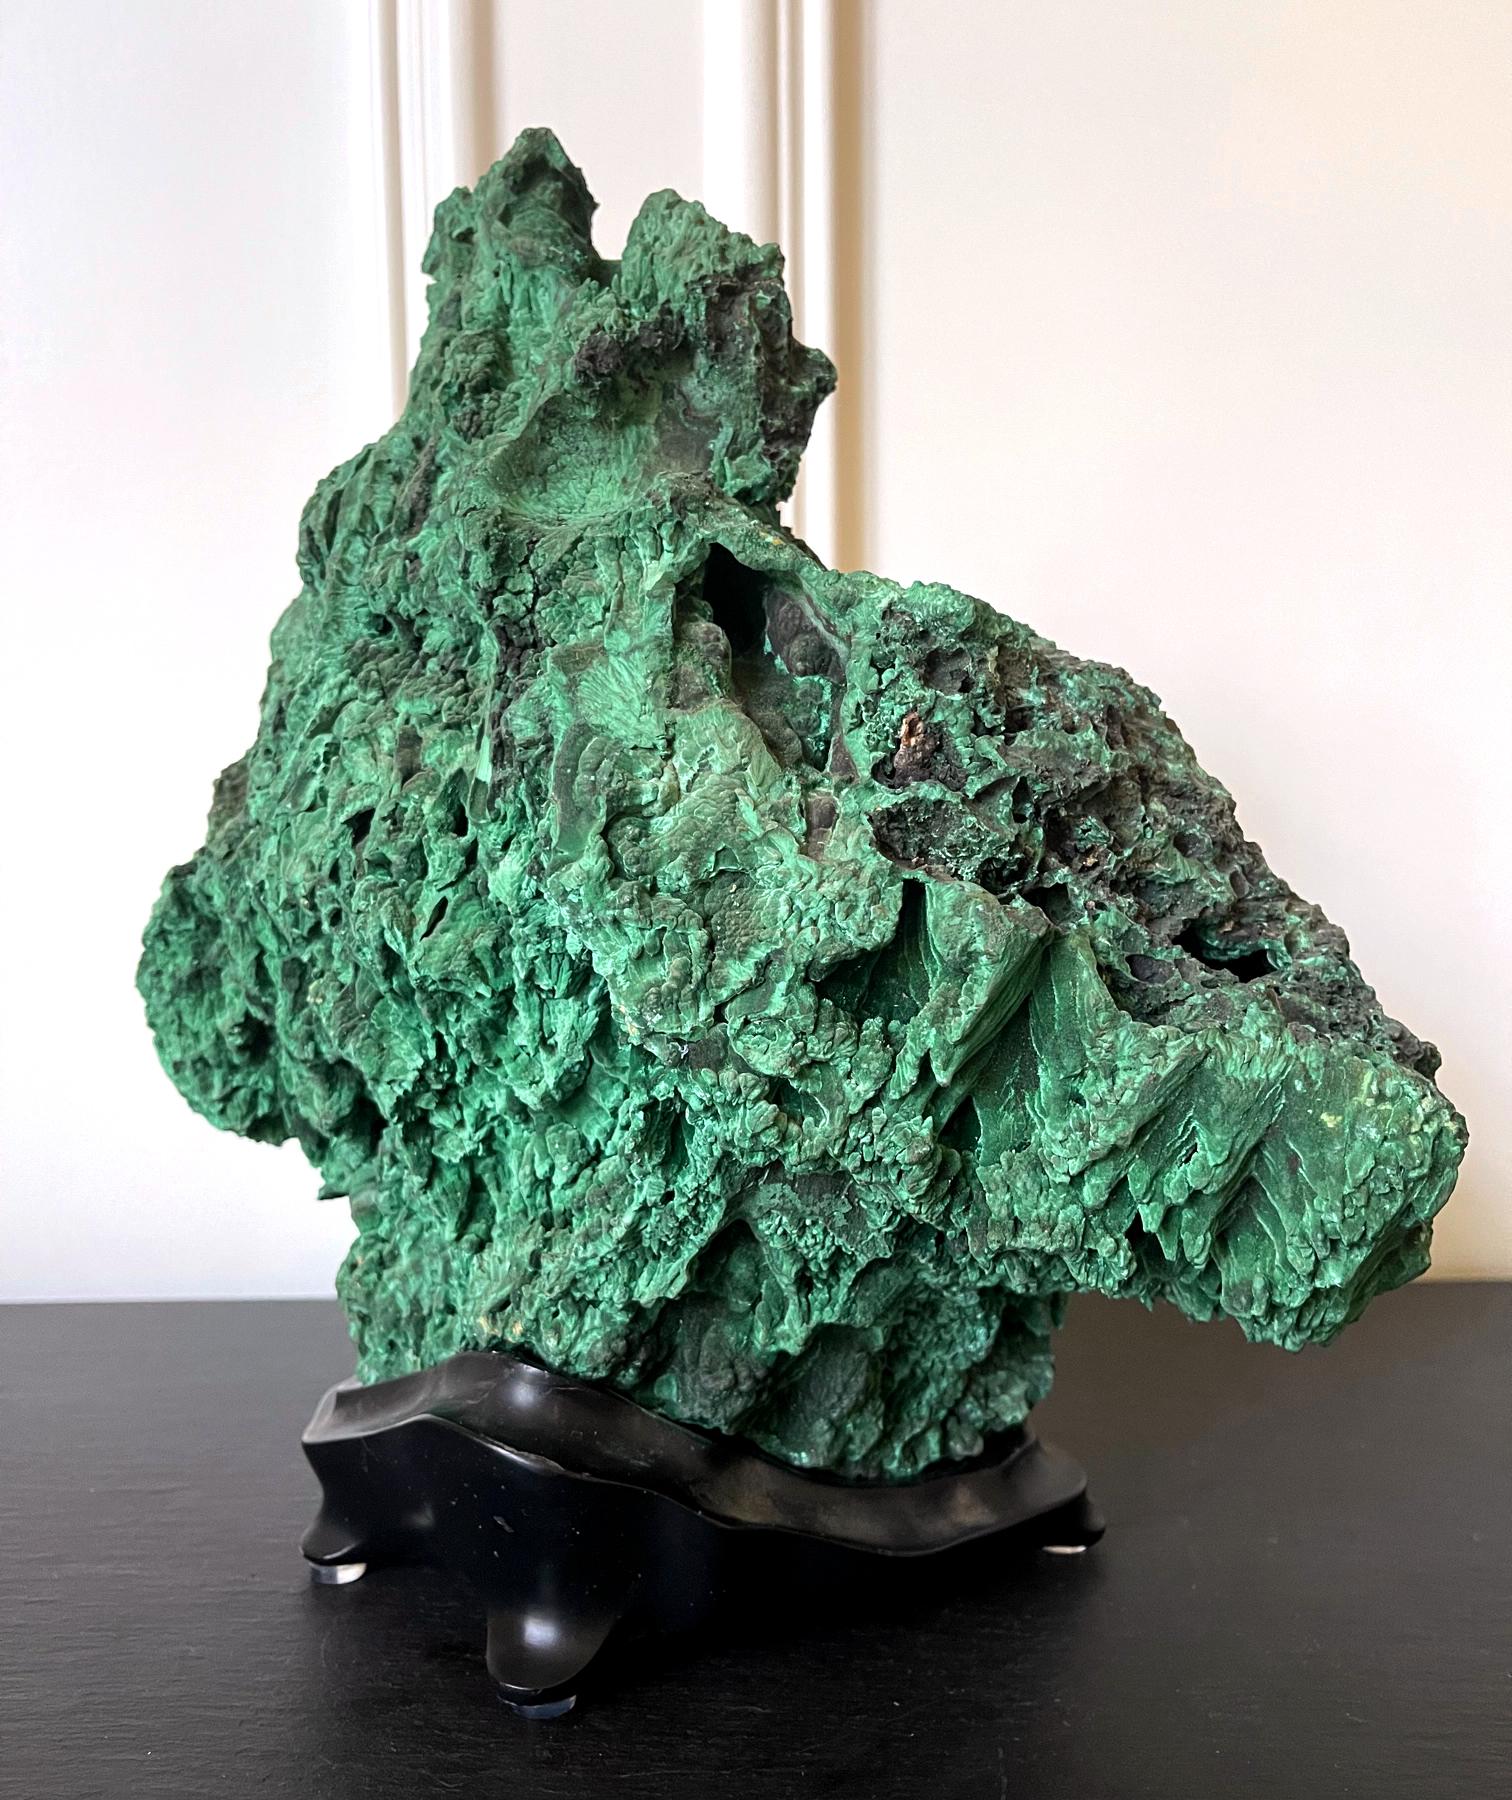 A natural malachite stone on a fitted wood stand displayed as a Chinese scholar stone (Gong Shi), also known as meditation stone. The natural specimen displays a wonderful mountainous form with a peak in the center, organic and well balanced. The